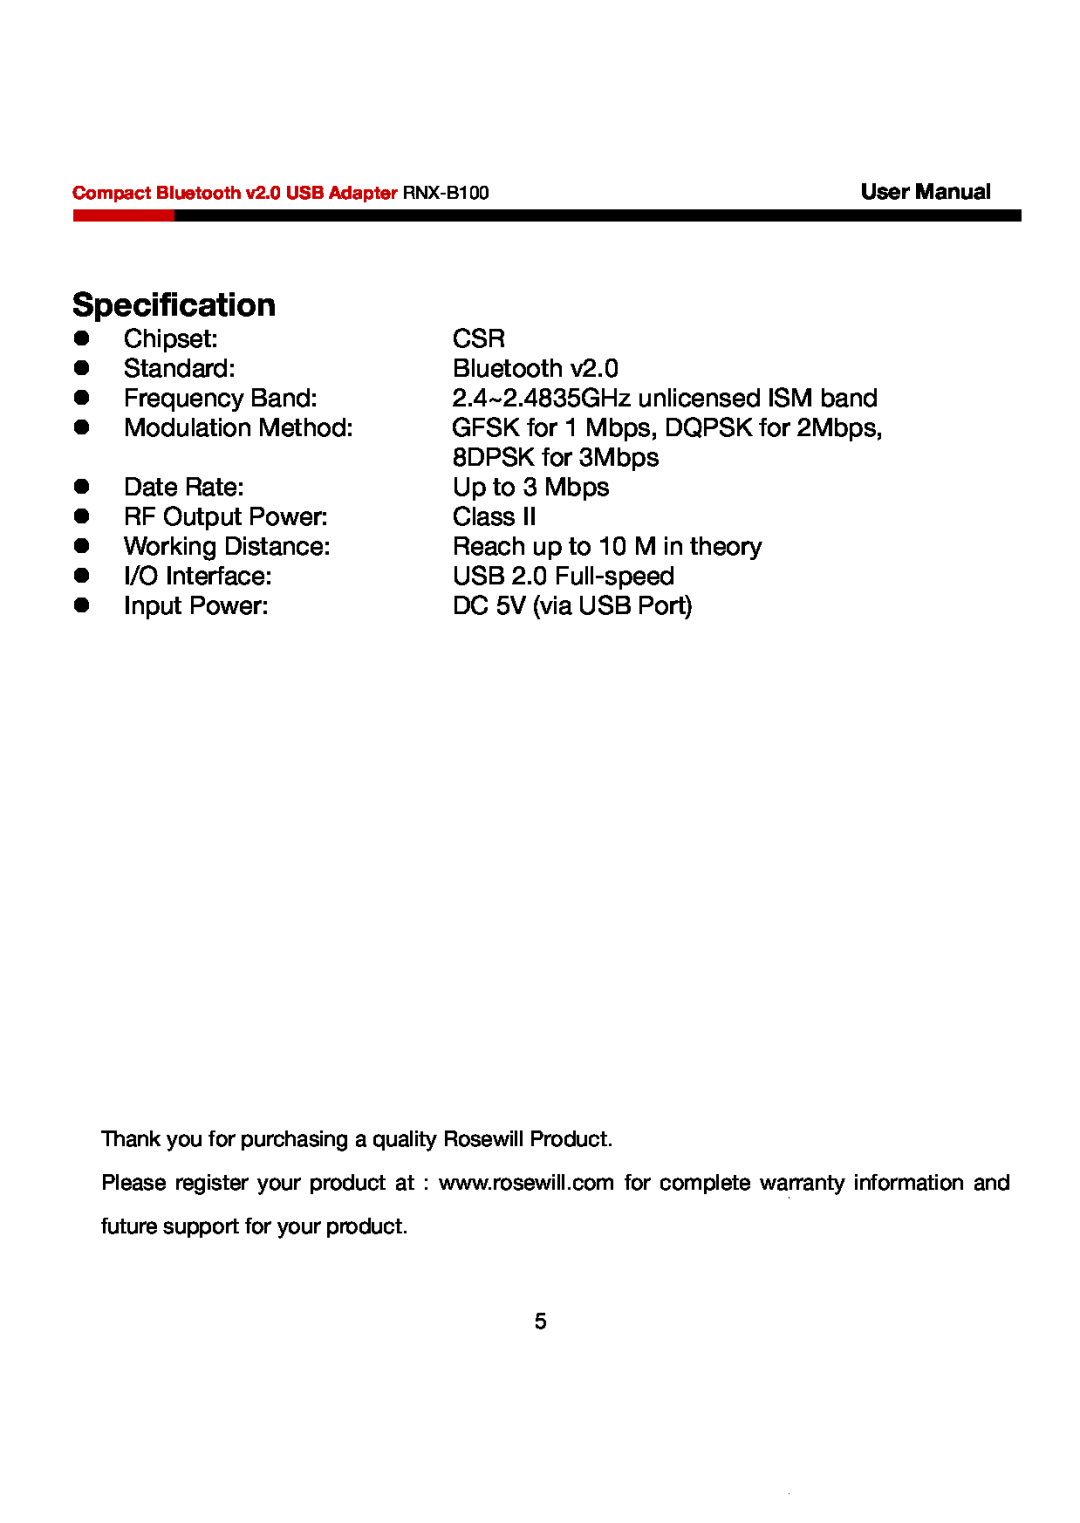 Rosewill RNX-B100 user manual Specification 